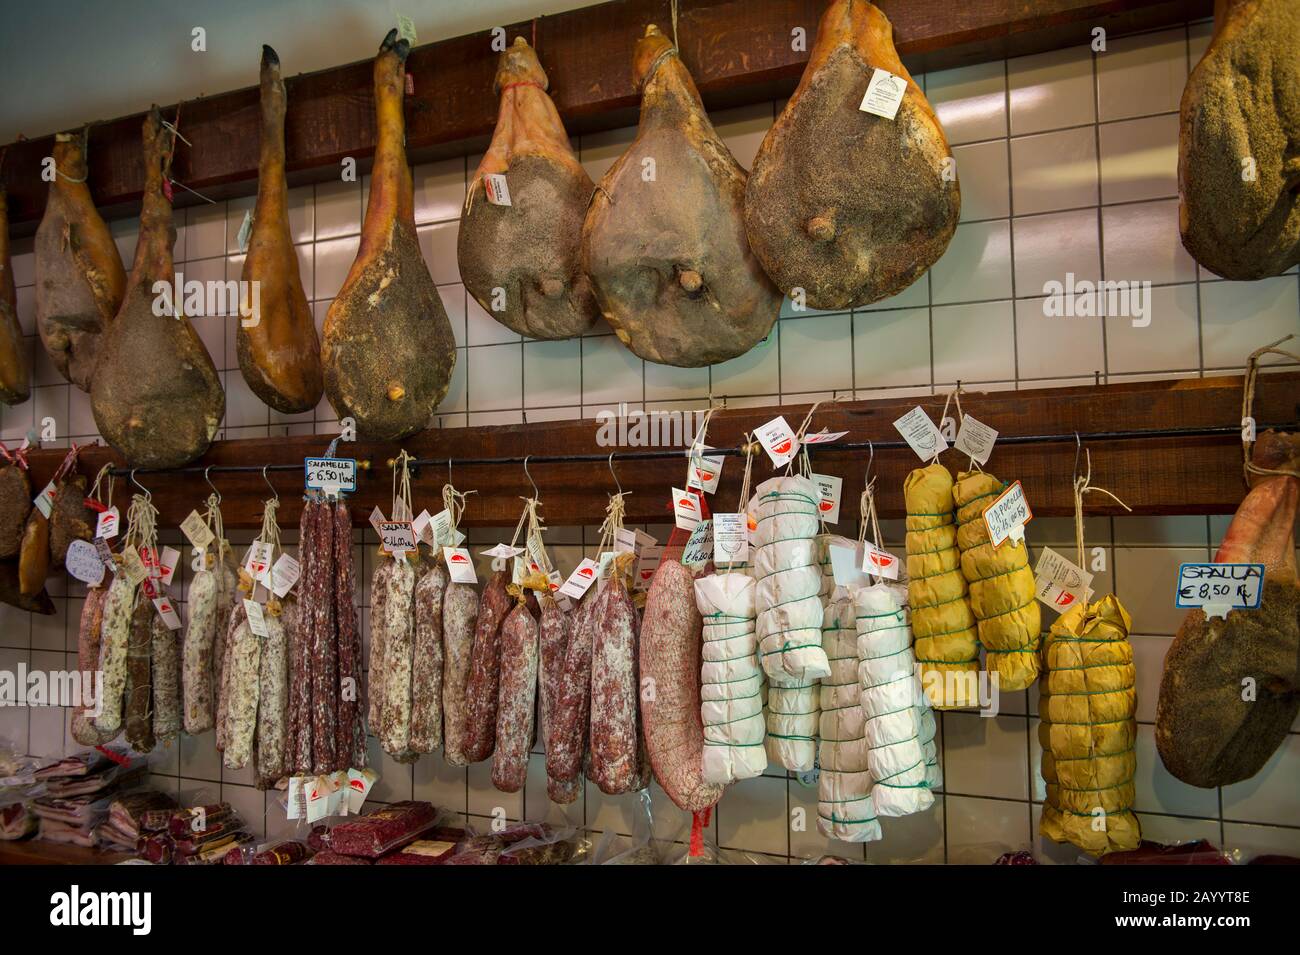 Inside a specialty store displaying sausages and hams in Pienza, Val d'Orcia, Tuscany, Italy. Stock Photo